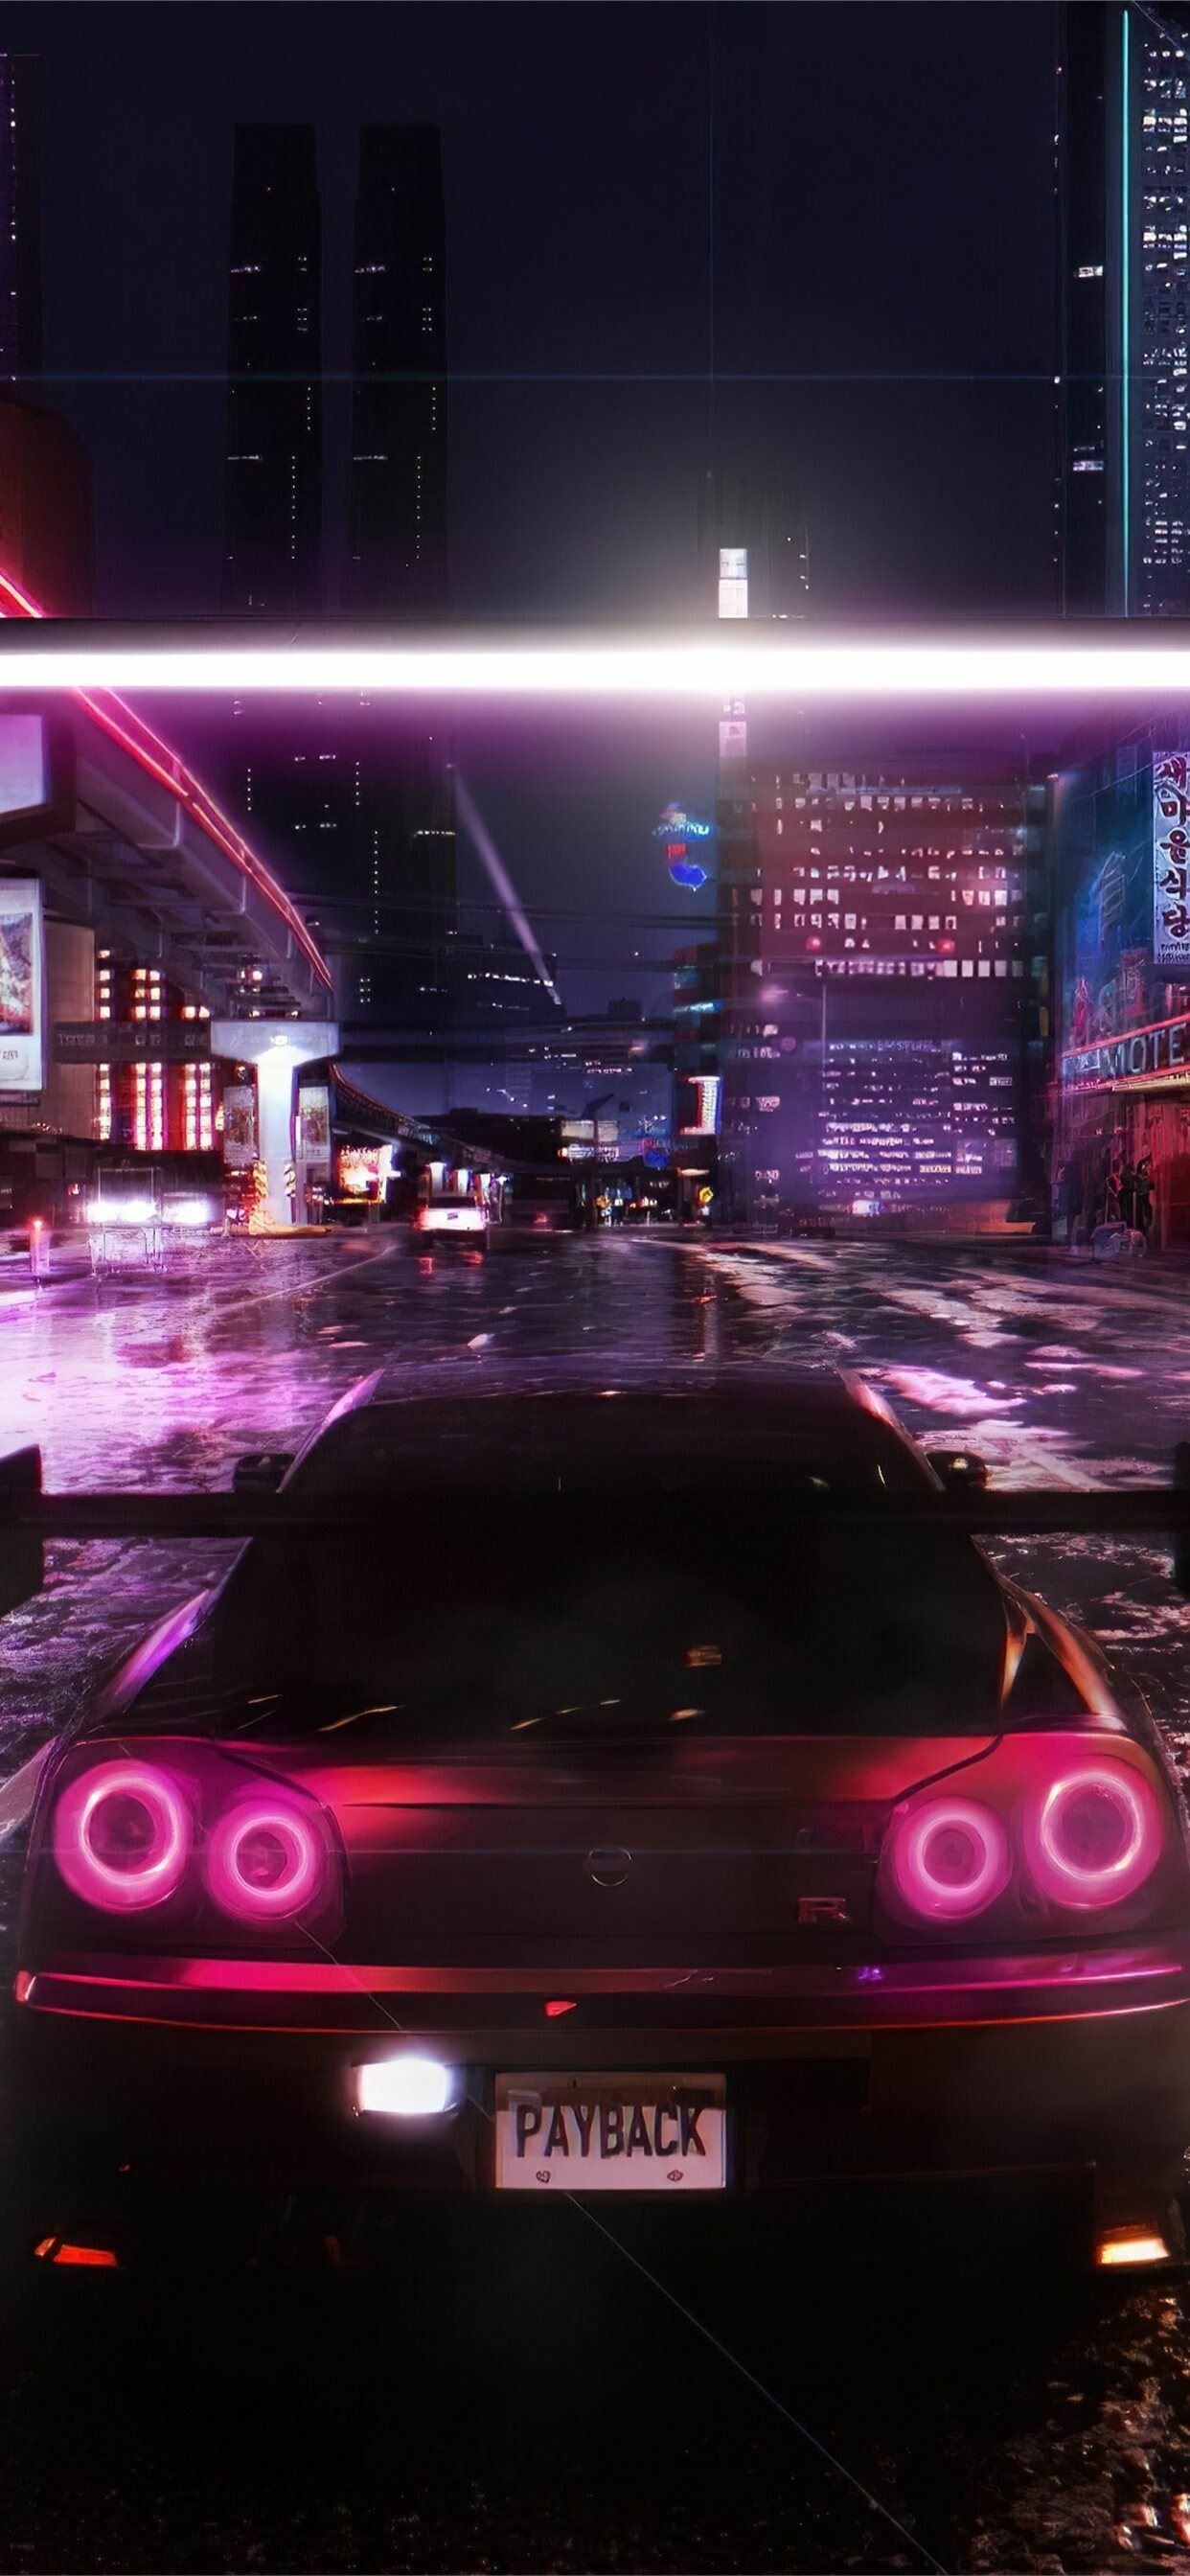 Need for Speed: The games in the series have some form of multiplayer mode allowing players to race one another. 1250x2690 HD Wallpaper.